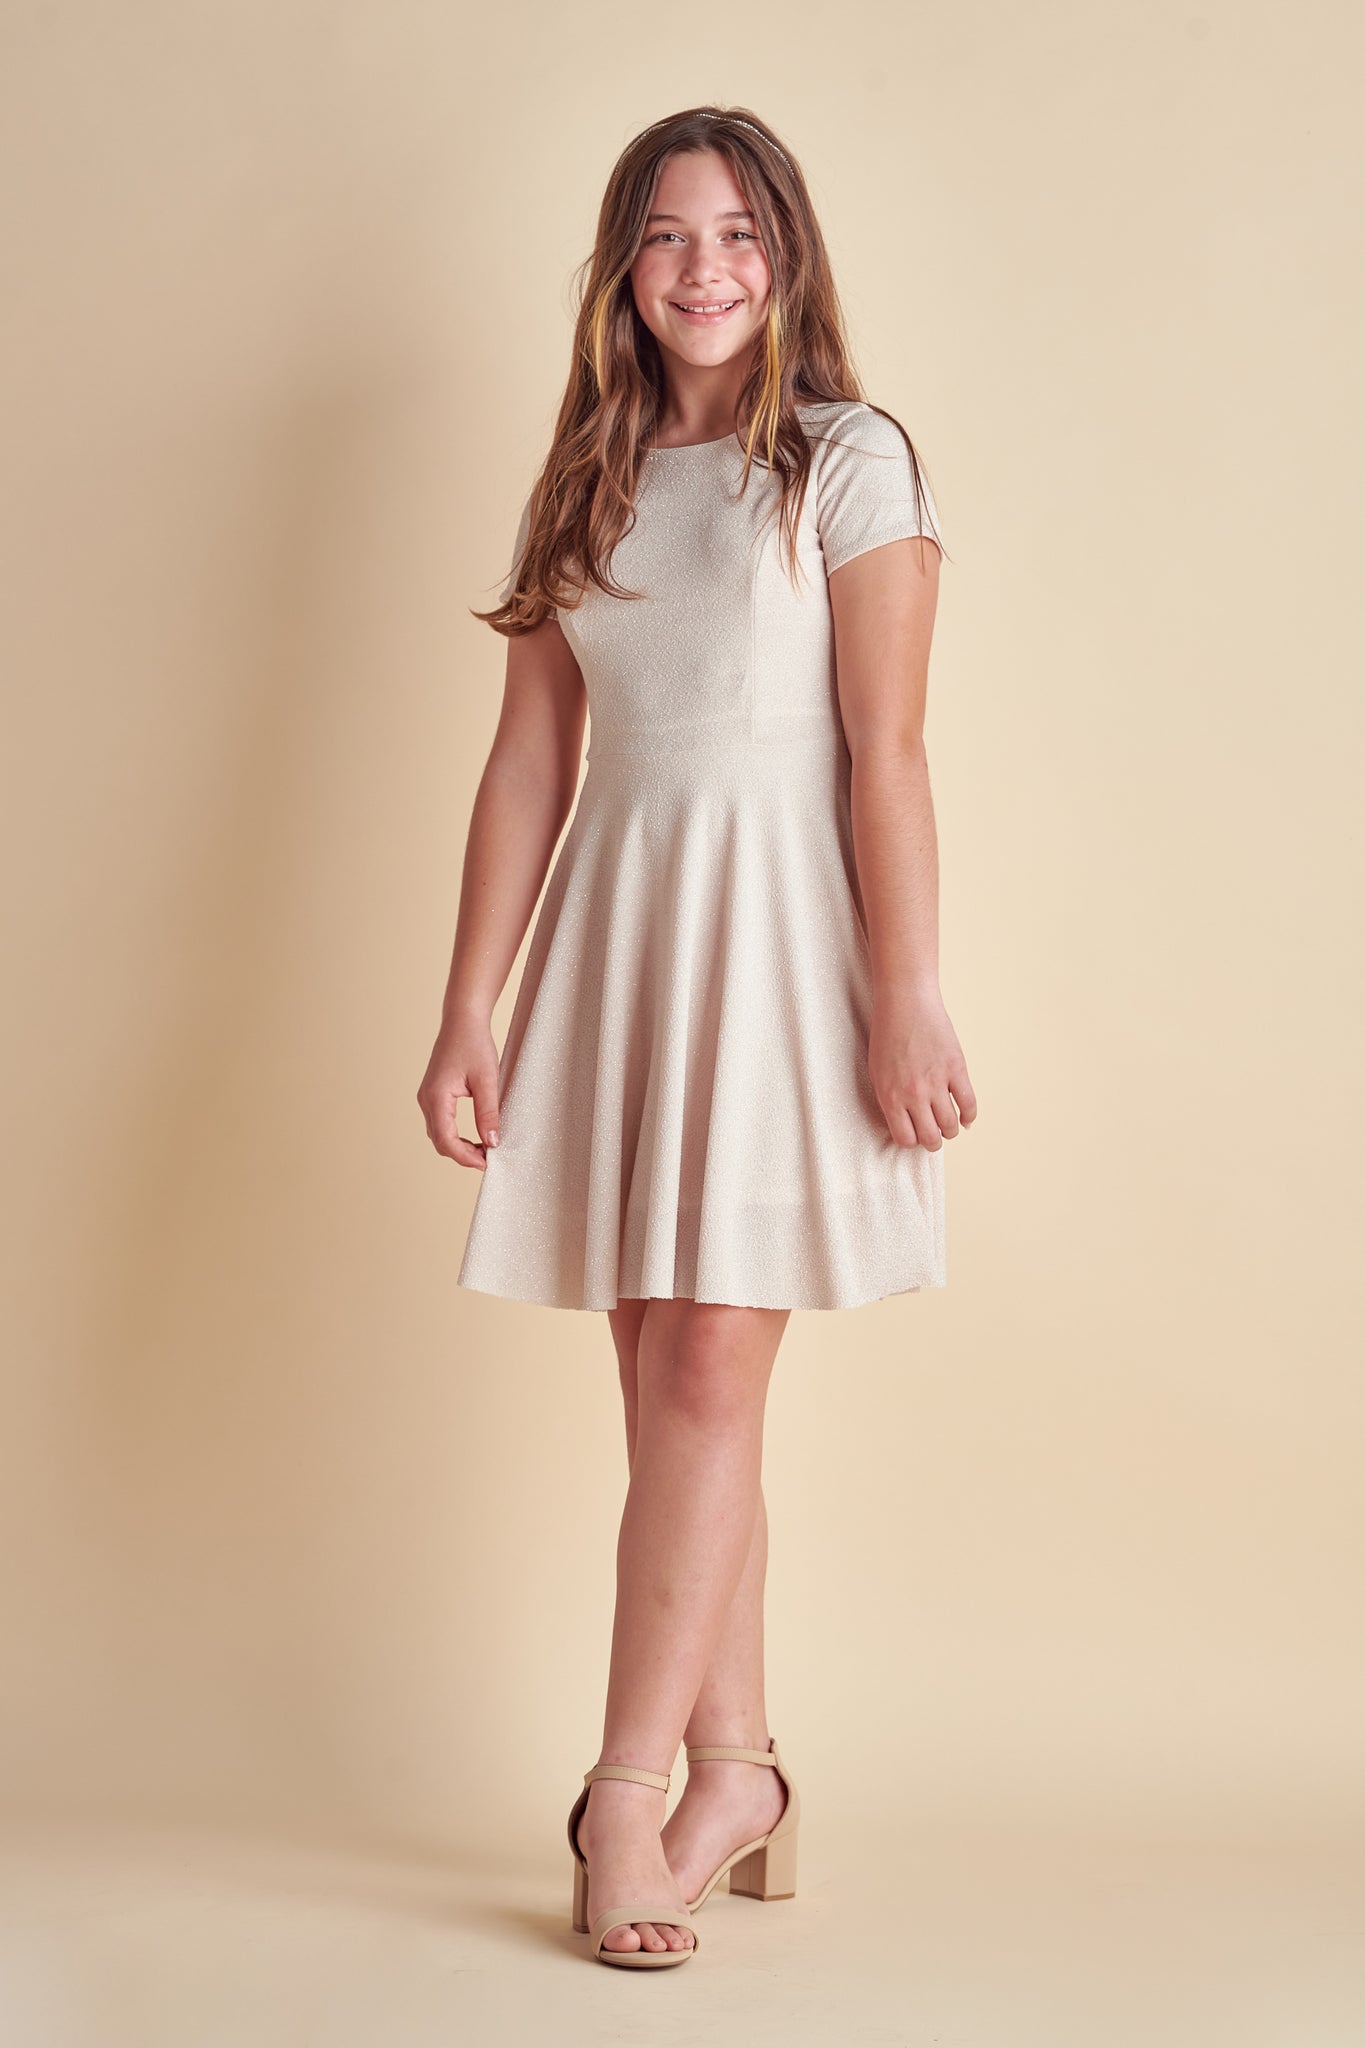 This is an all over champagne stretch glitter dress made with soft lining. It's non-scratch fabric is a perfect dress that hits right above the knee and has a lower v-back detailing.